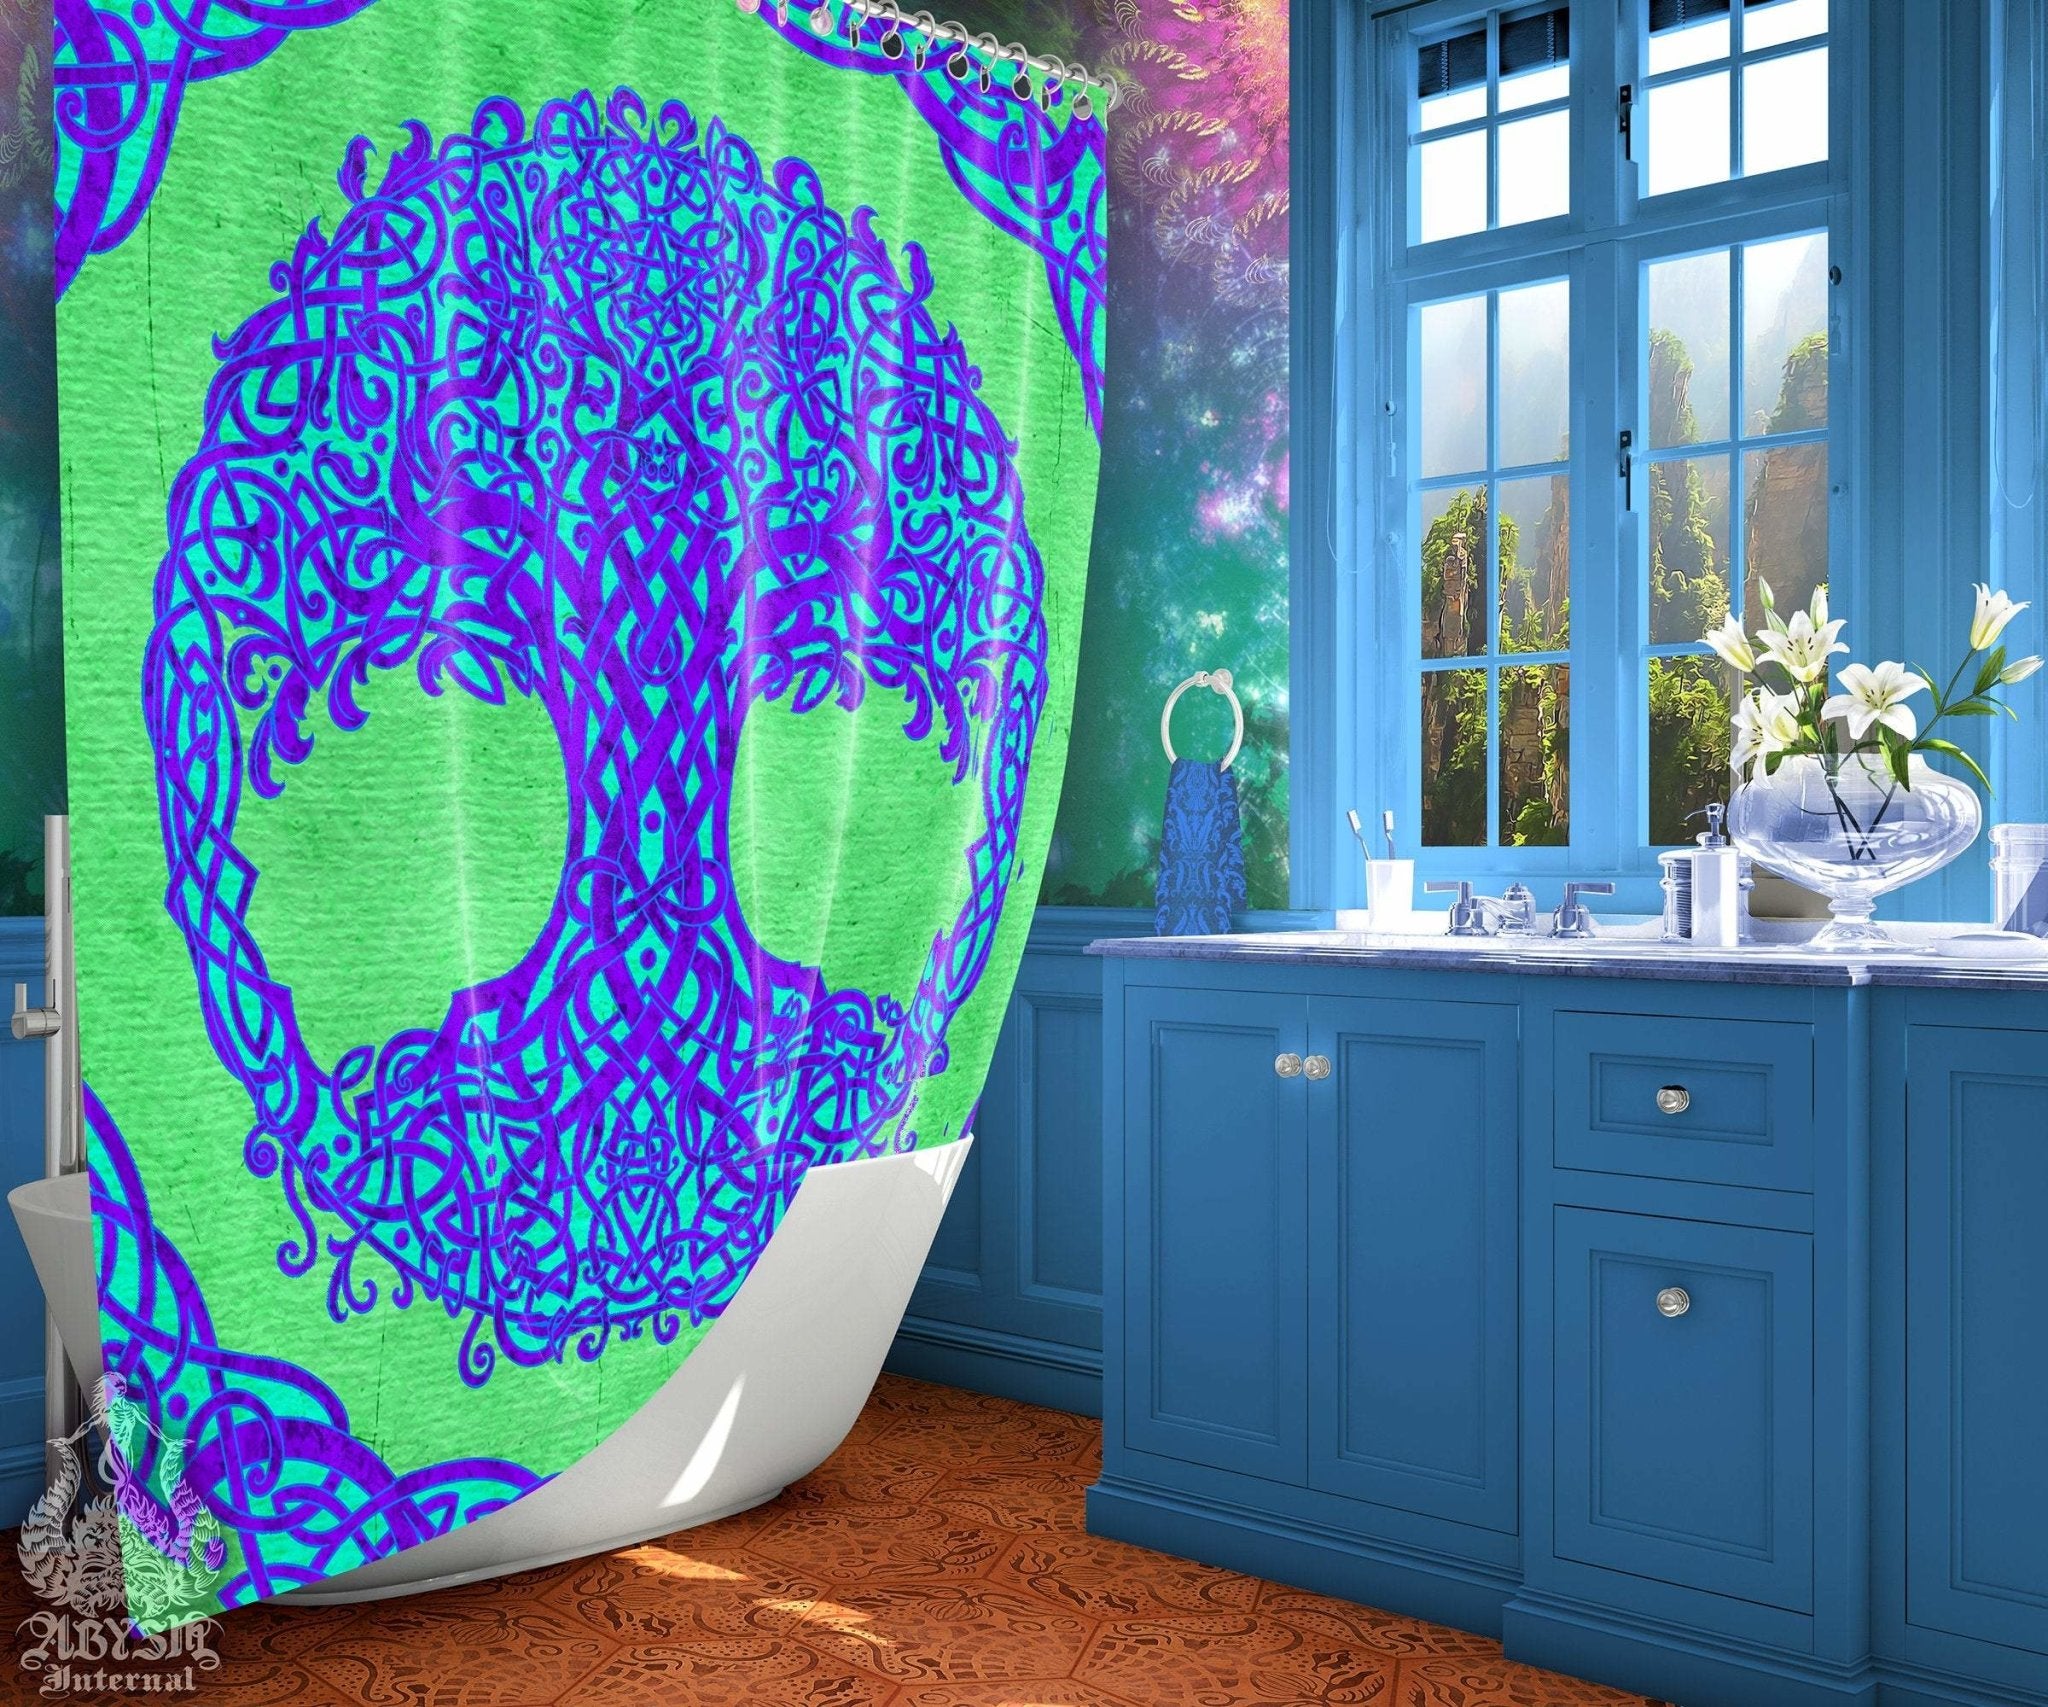 Tree of Life Shower Curtain, Boho and Pagan Bathroom Decor, Celtic Knot, Eclectic and Funky Home - Psy, Green & Purple - Abysm Internal